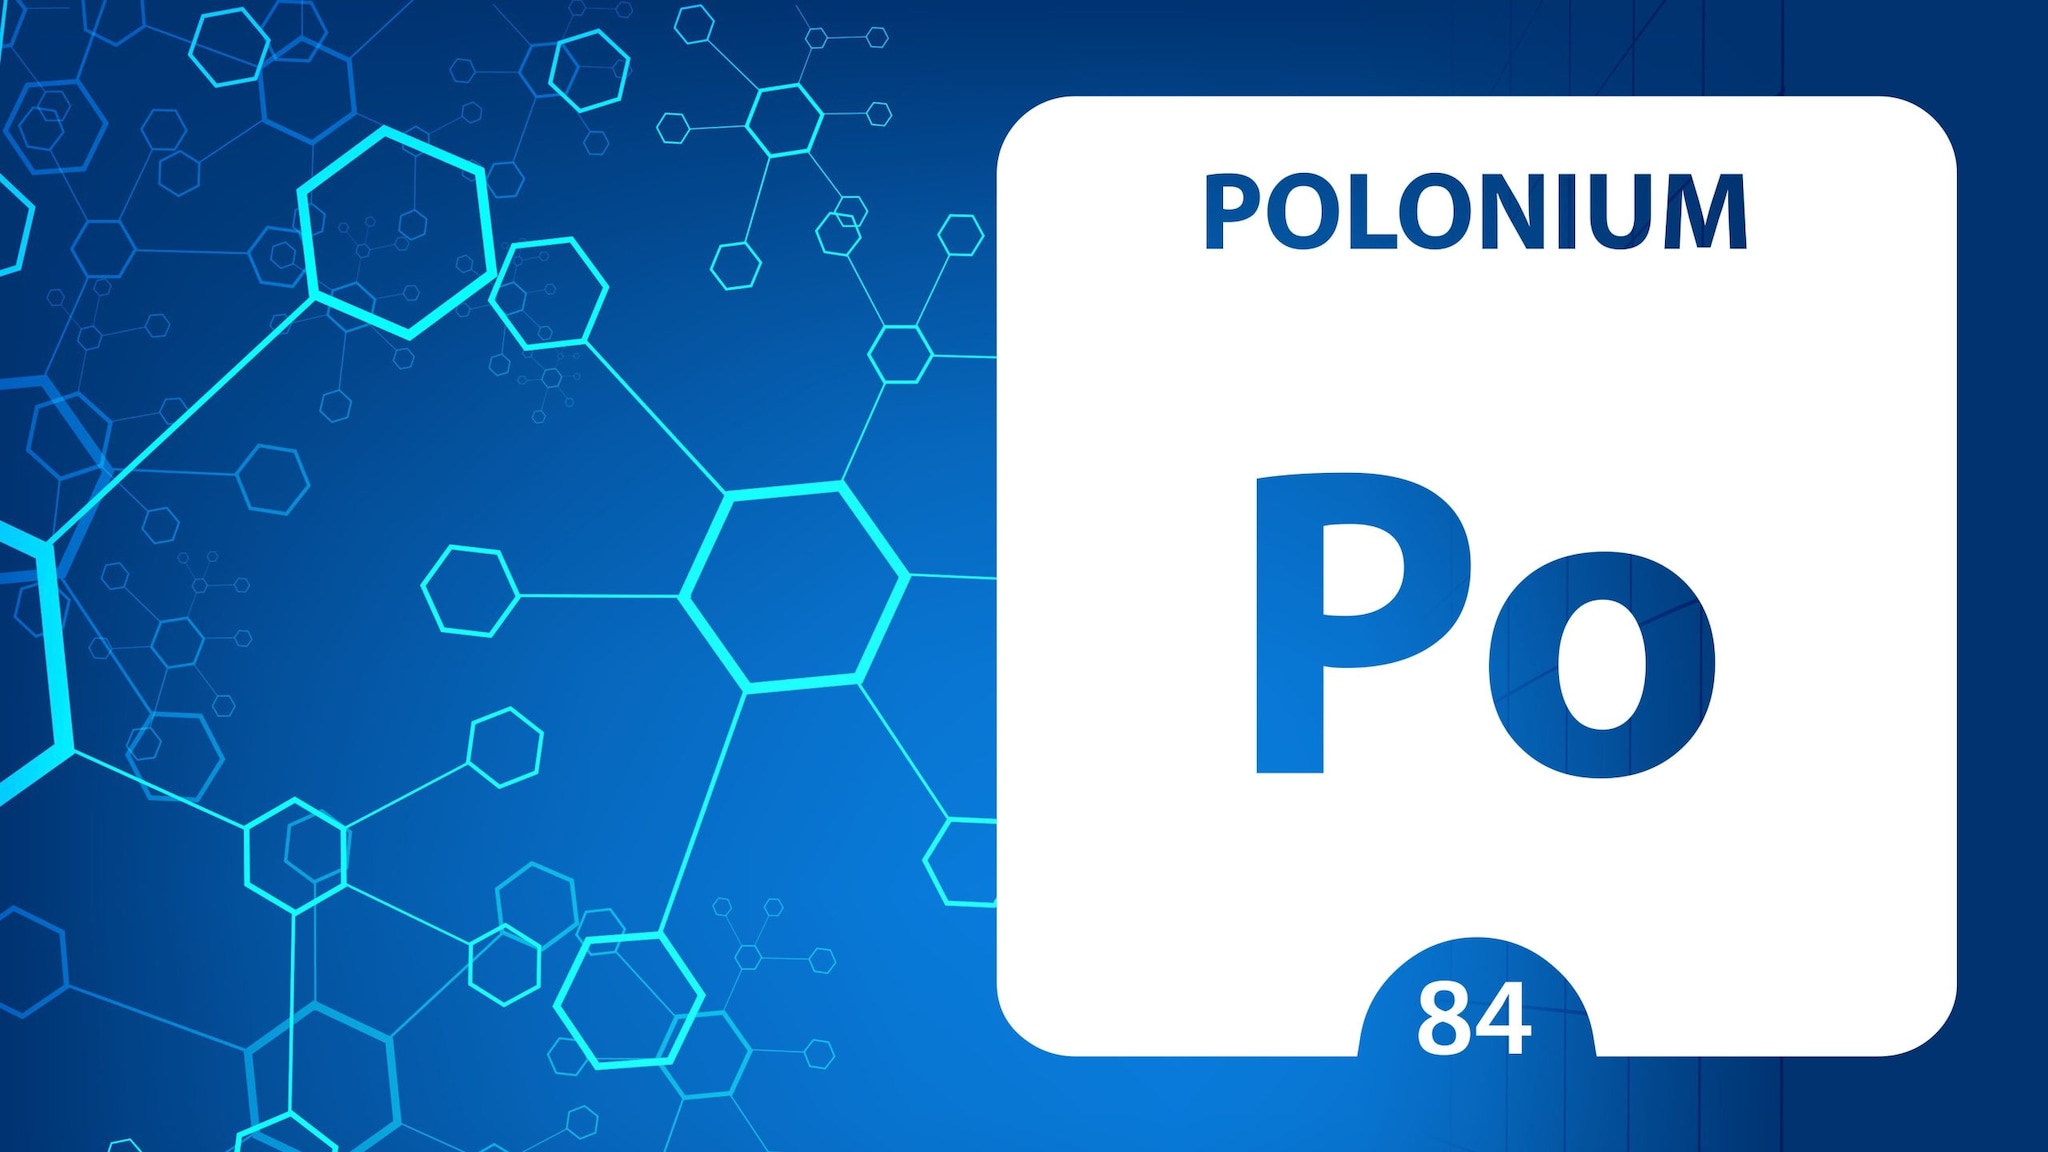 Polonium 84 element. Alkaline earth metals. Chemical Element of Mendeleev Periodic Table. Polonium in square cube creative concept.